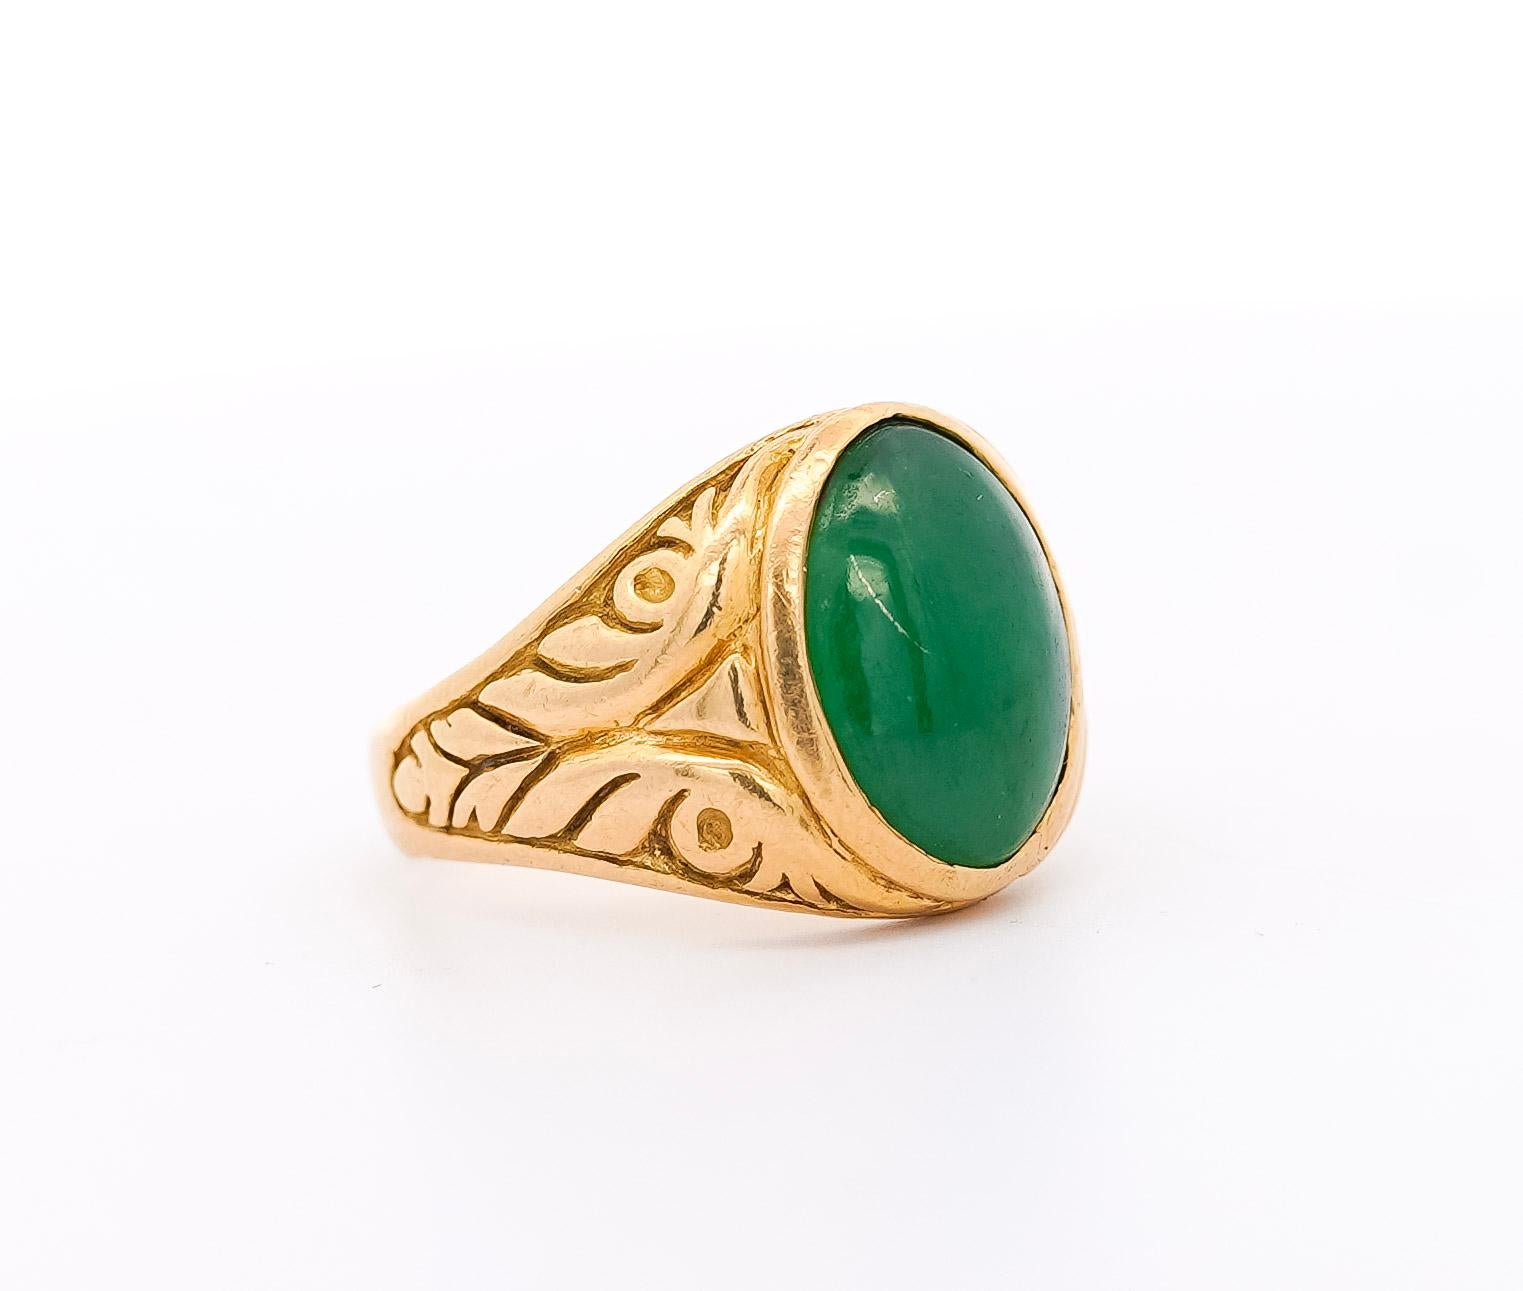 Natural Grade A Jadeite Jade solitaire ring in a 22k carved gold bezel setting. Centering a natural Jadeite Jade, known as 